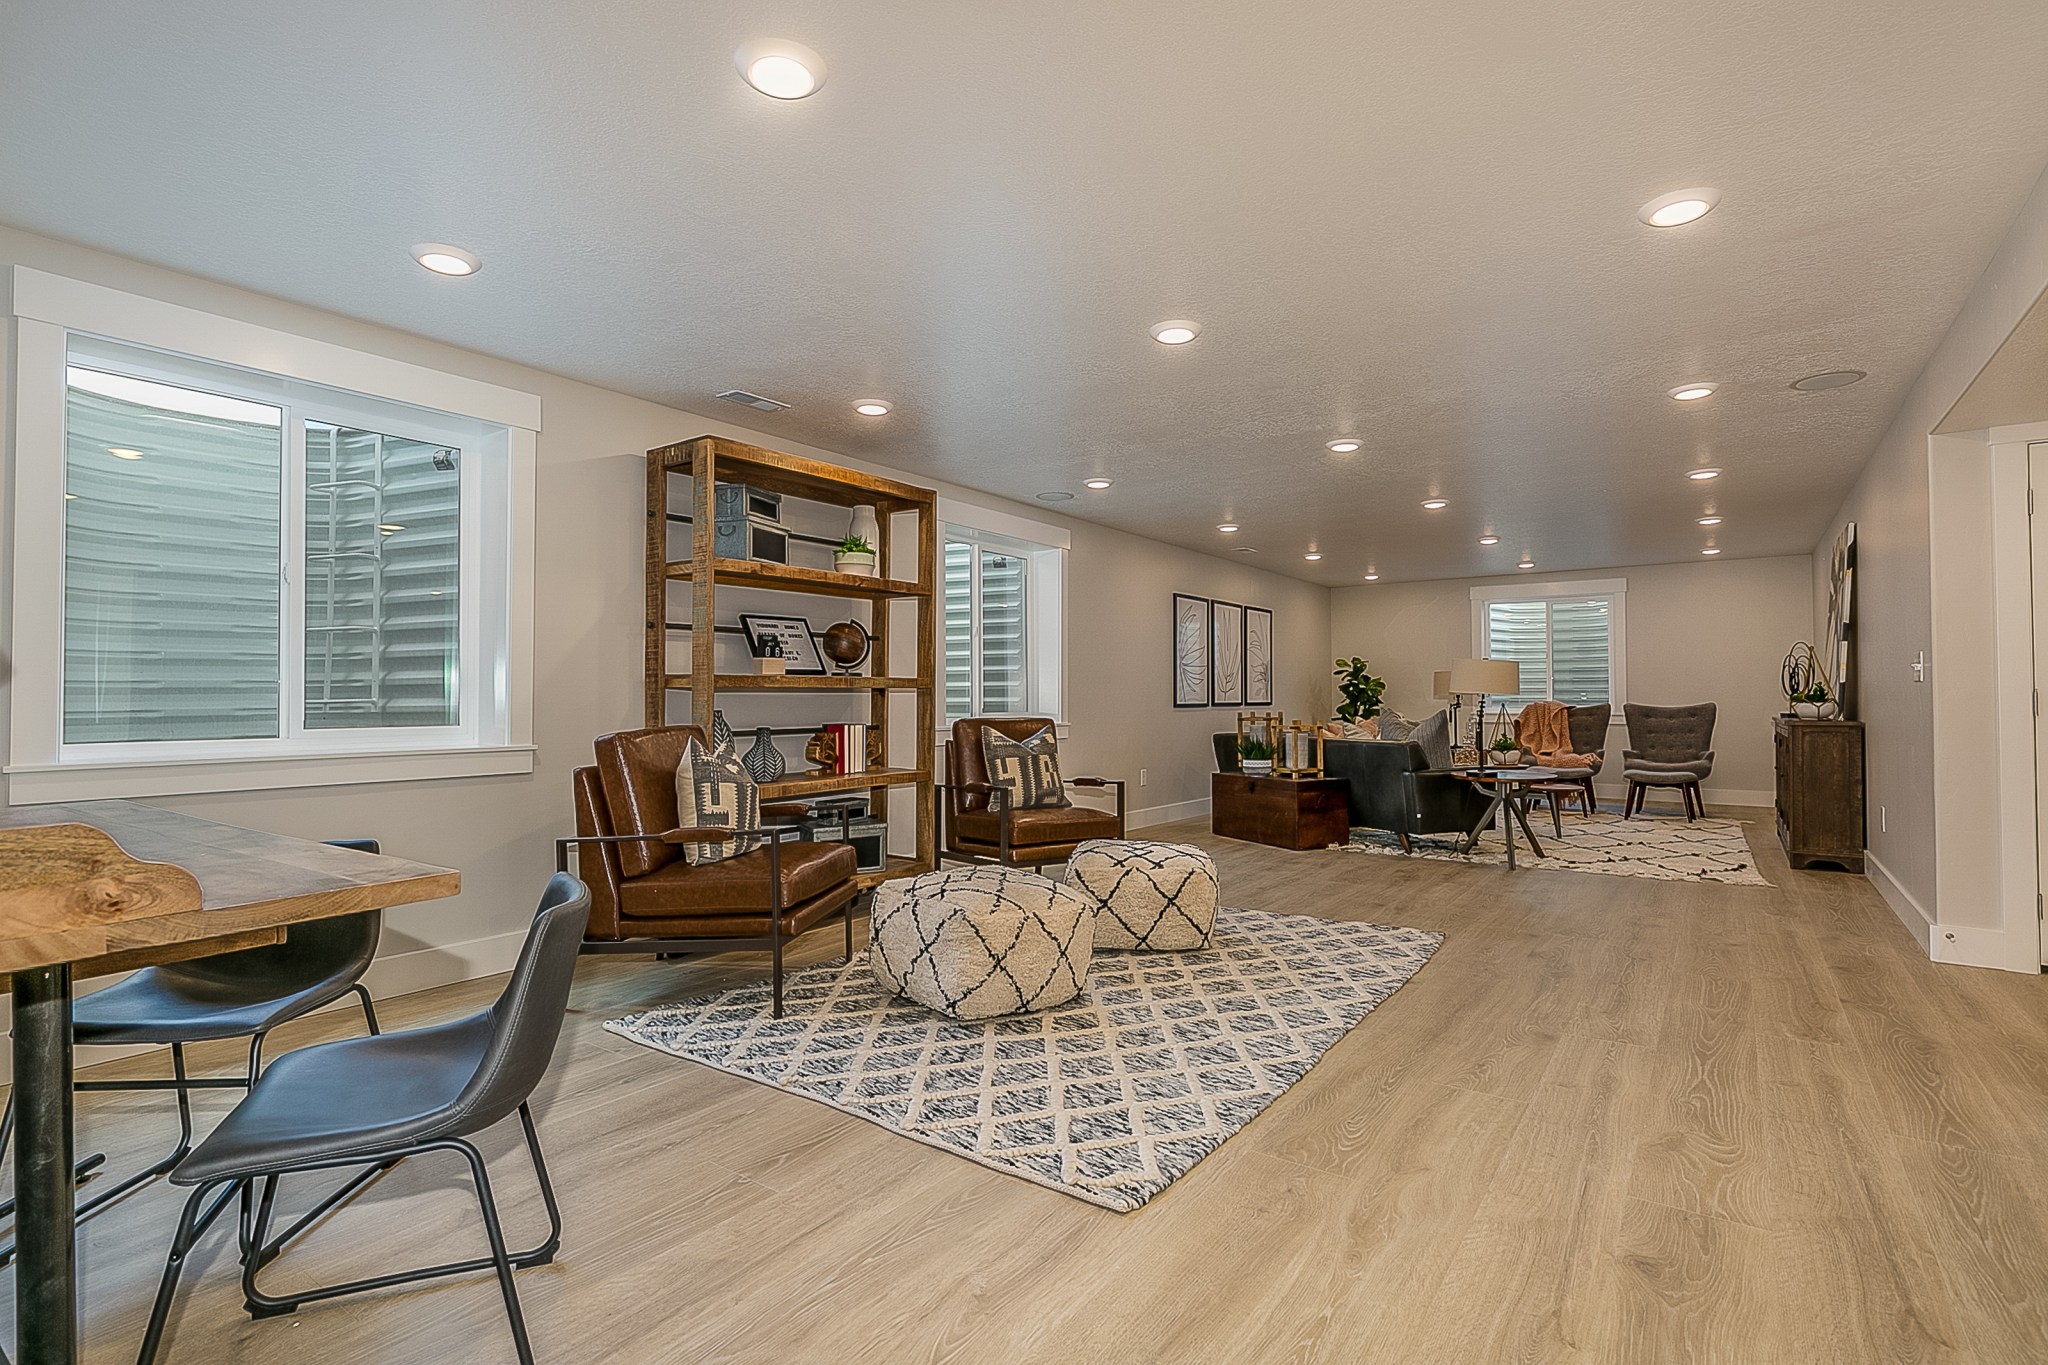 laminate wood flooring in a bright basement living area with lots of seating and egress windows